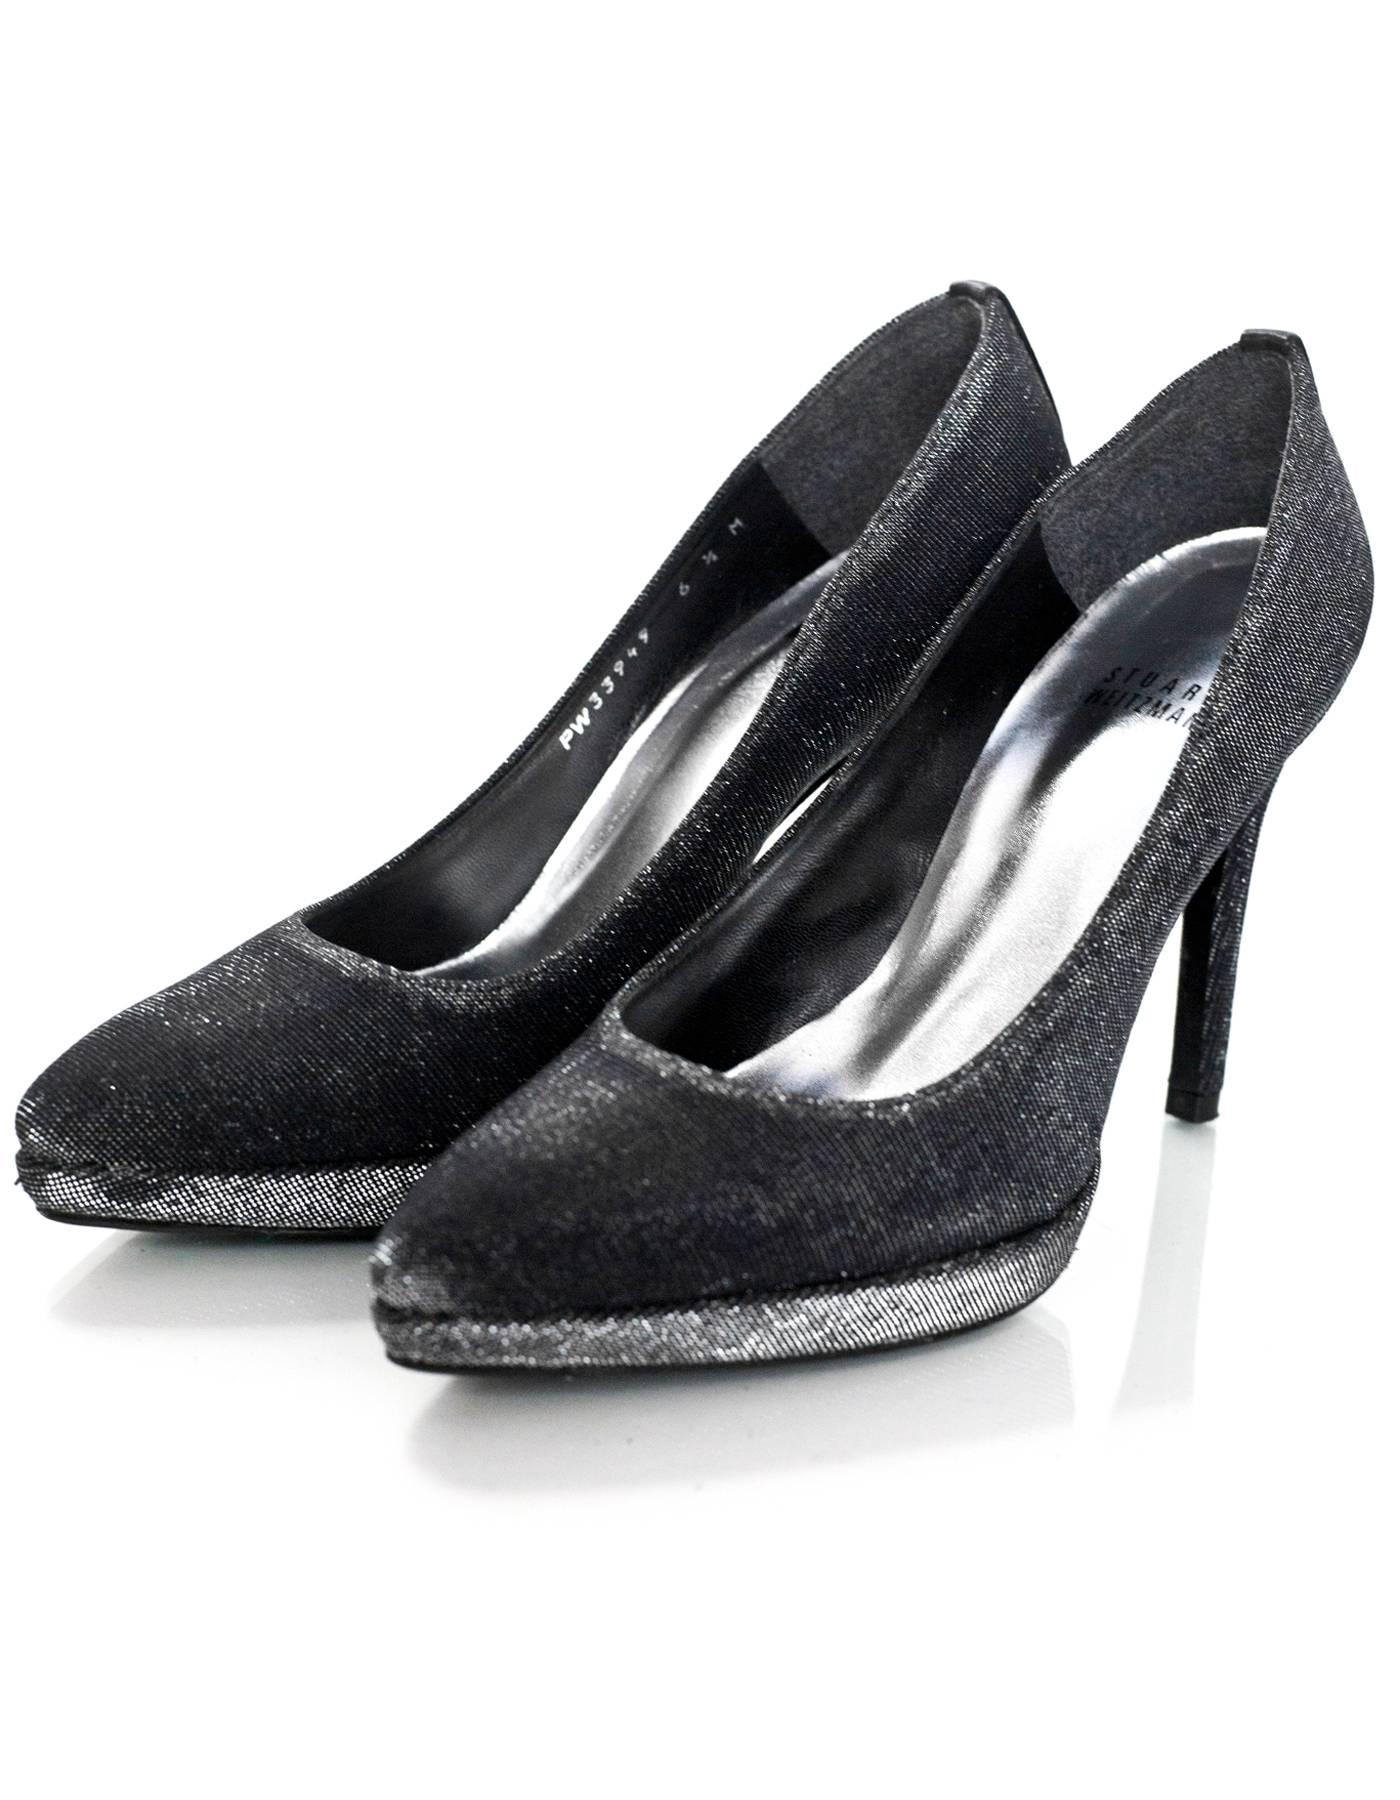 Stuart Weitzman Black Metallic Pumps Sz 6.5M

Made In: Spain
Color: Black/silver
Materials: Nylon-blend
Closure/Opening: Slide on
Sole Stamp: Stuart Weitzman Leather Sole Made In Spain
Overall Condition: Excellent pre-owned condition with the